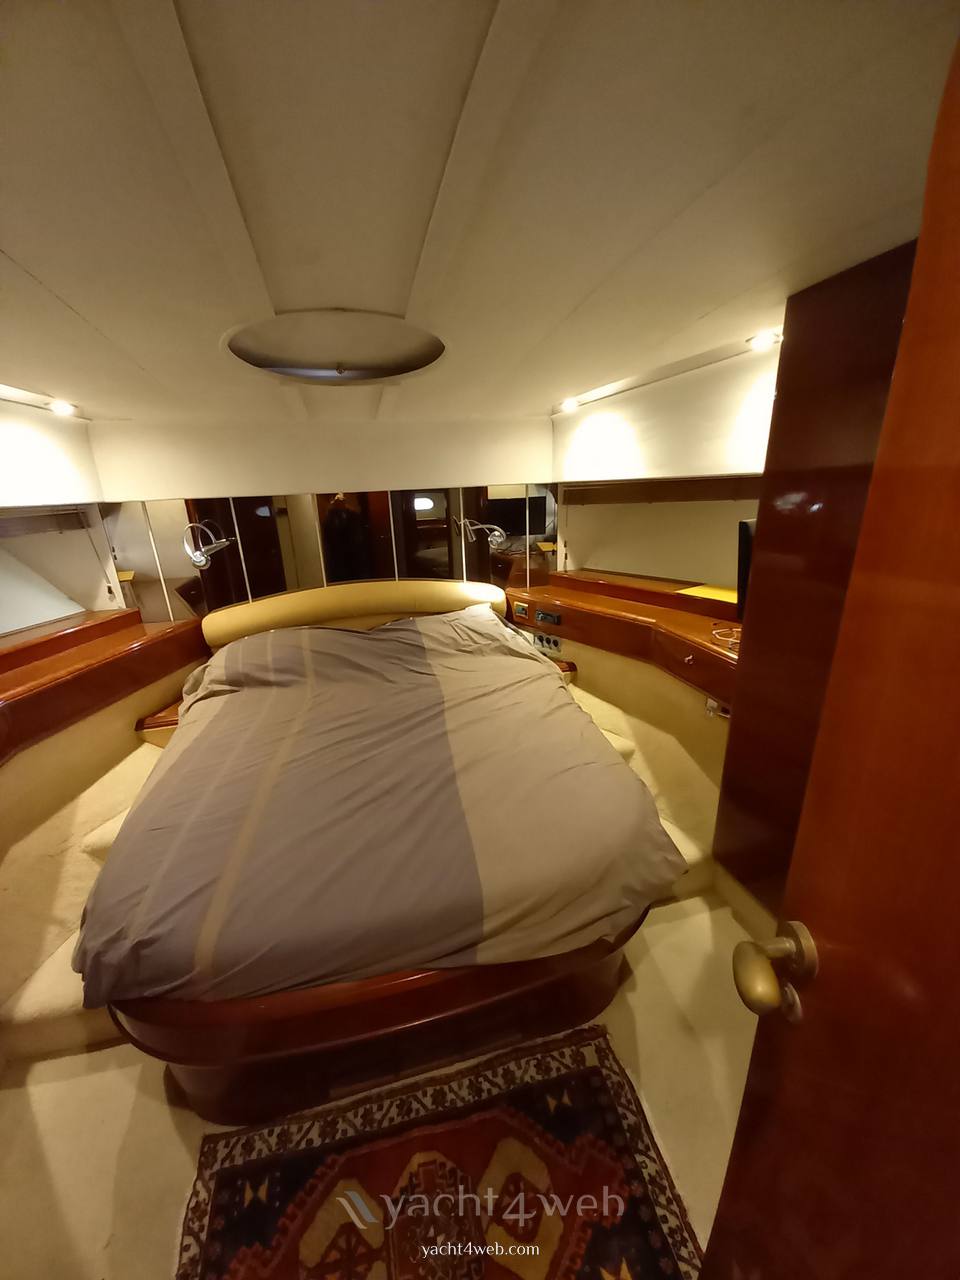 Fairline Squadron 65 Motor boat used for sale